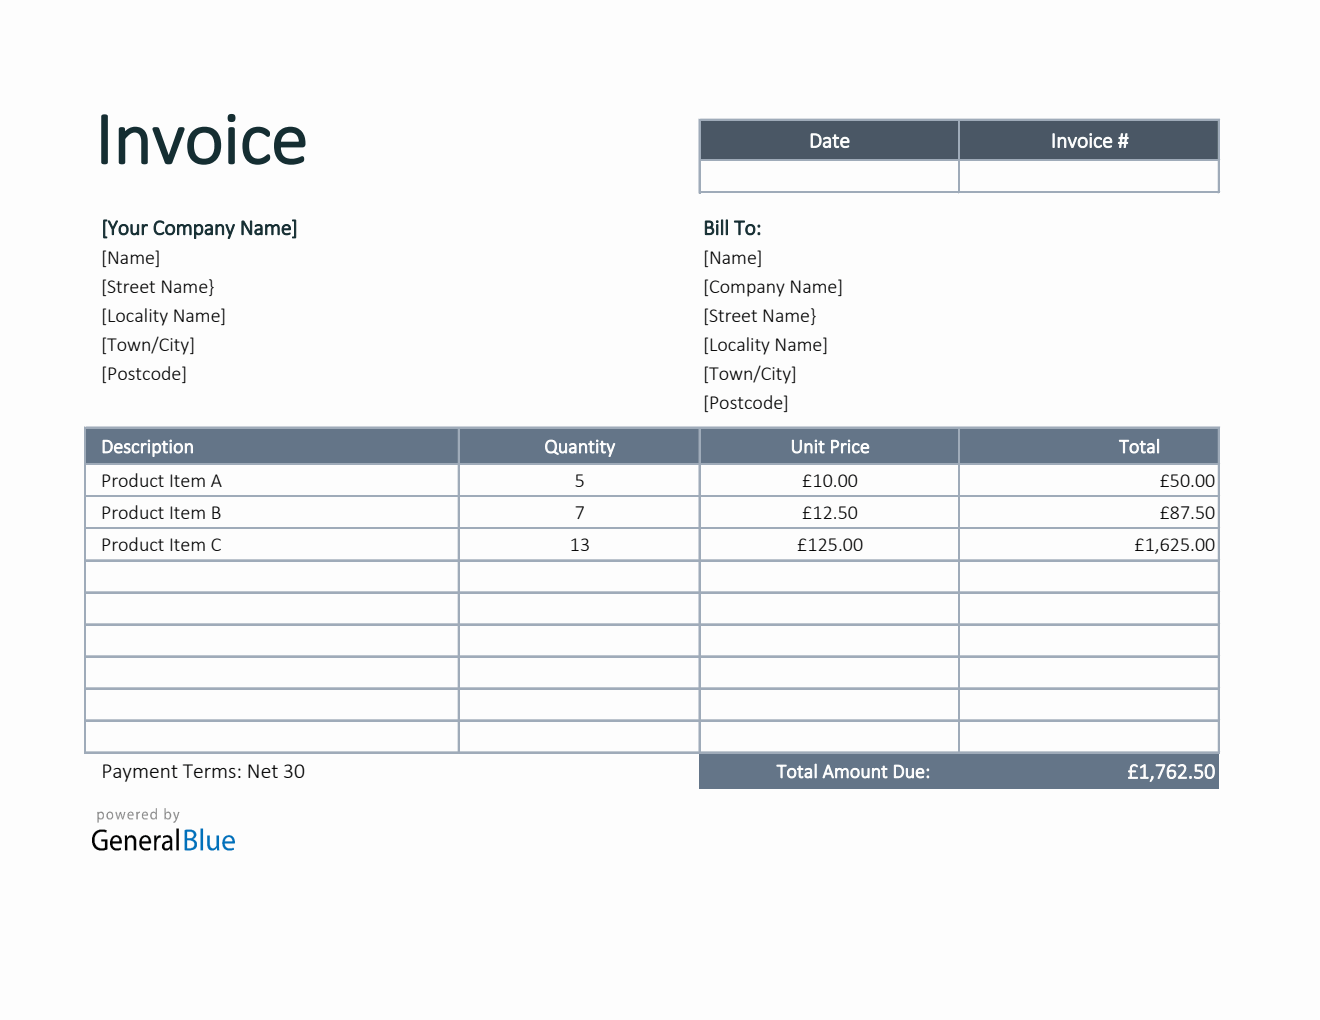 Invoice Template for U.K. in Excel (Bordered)